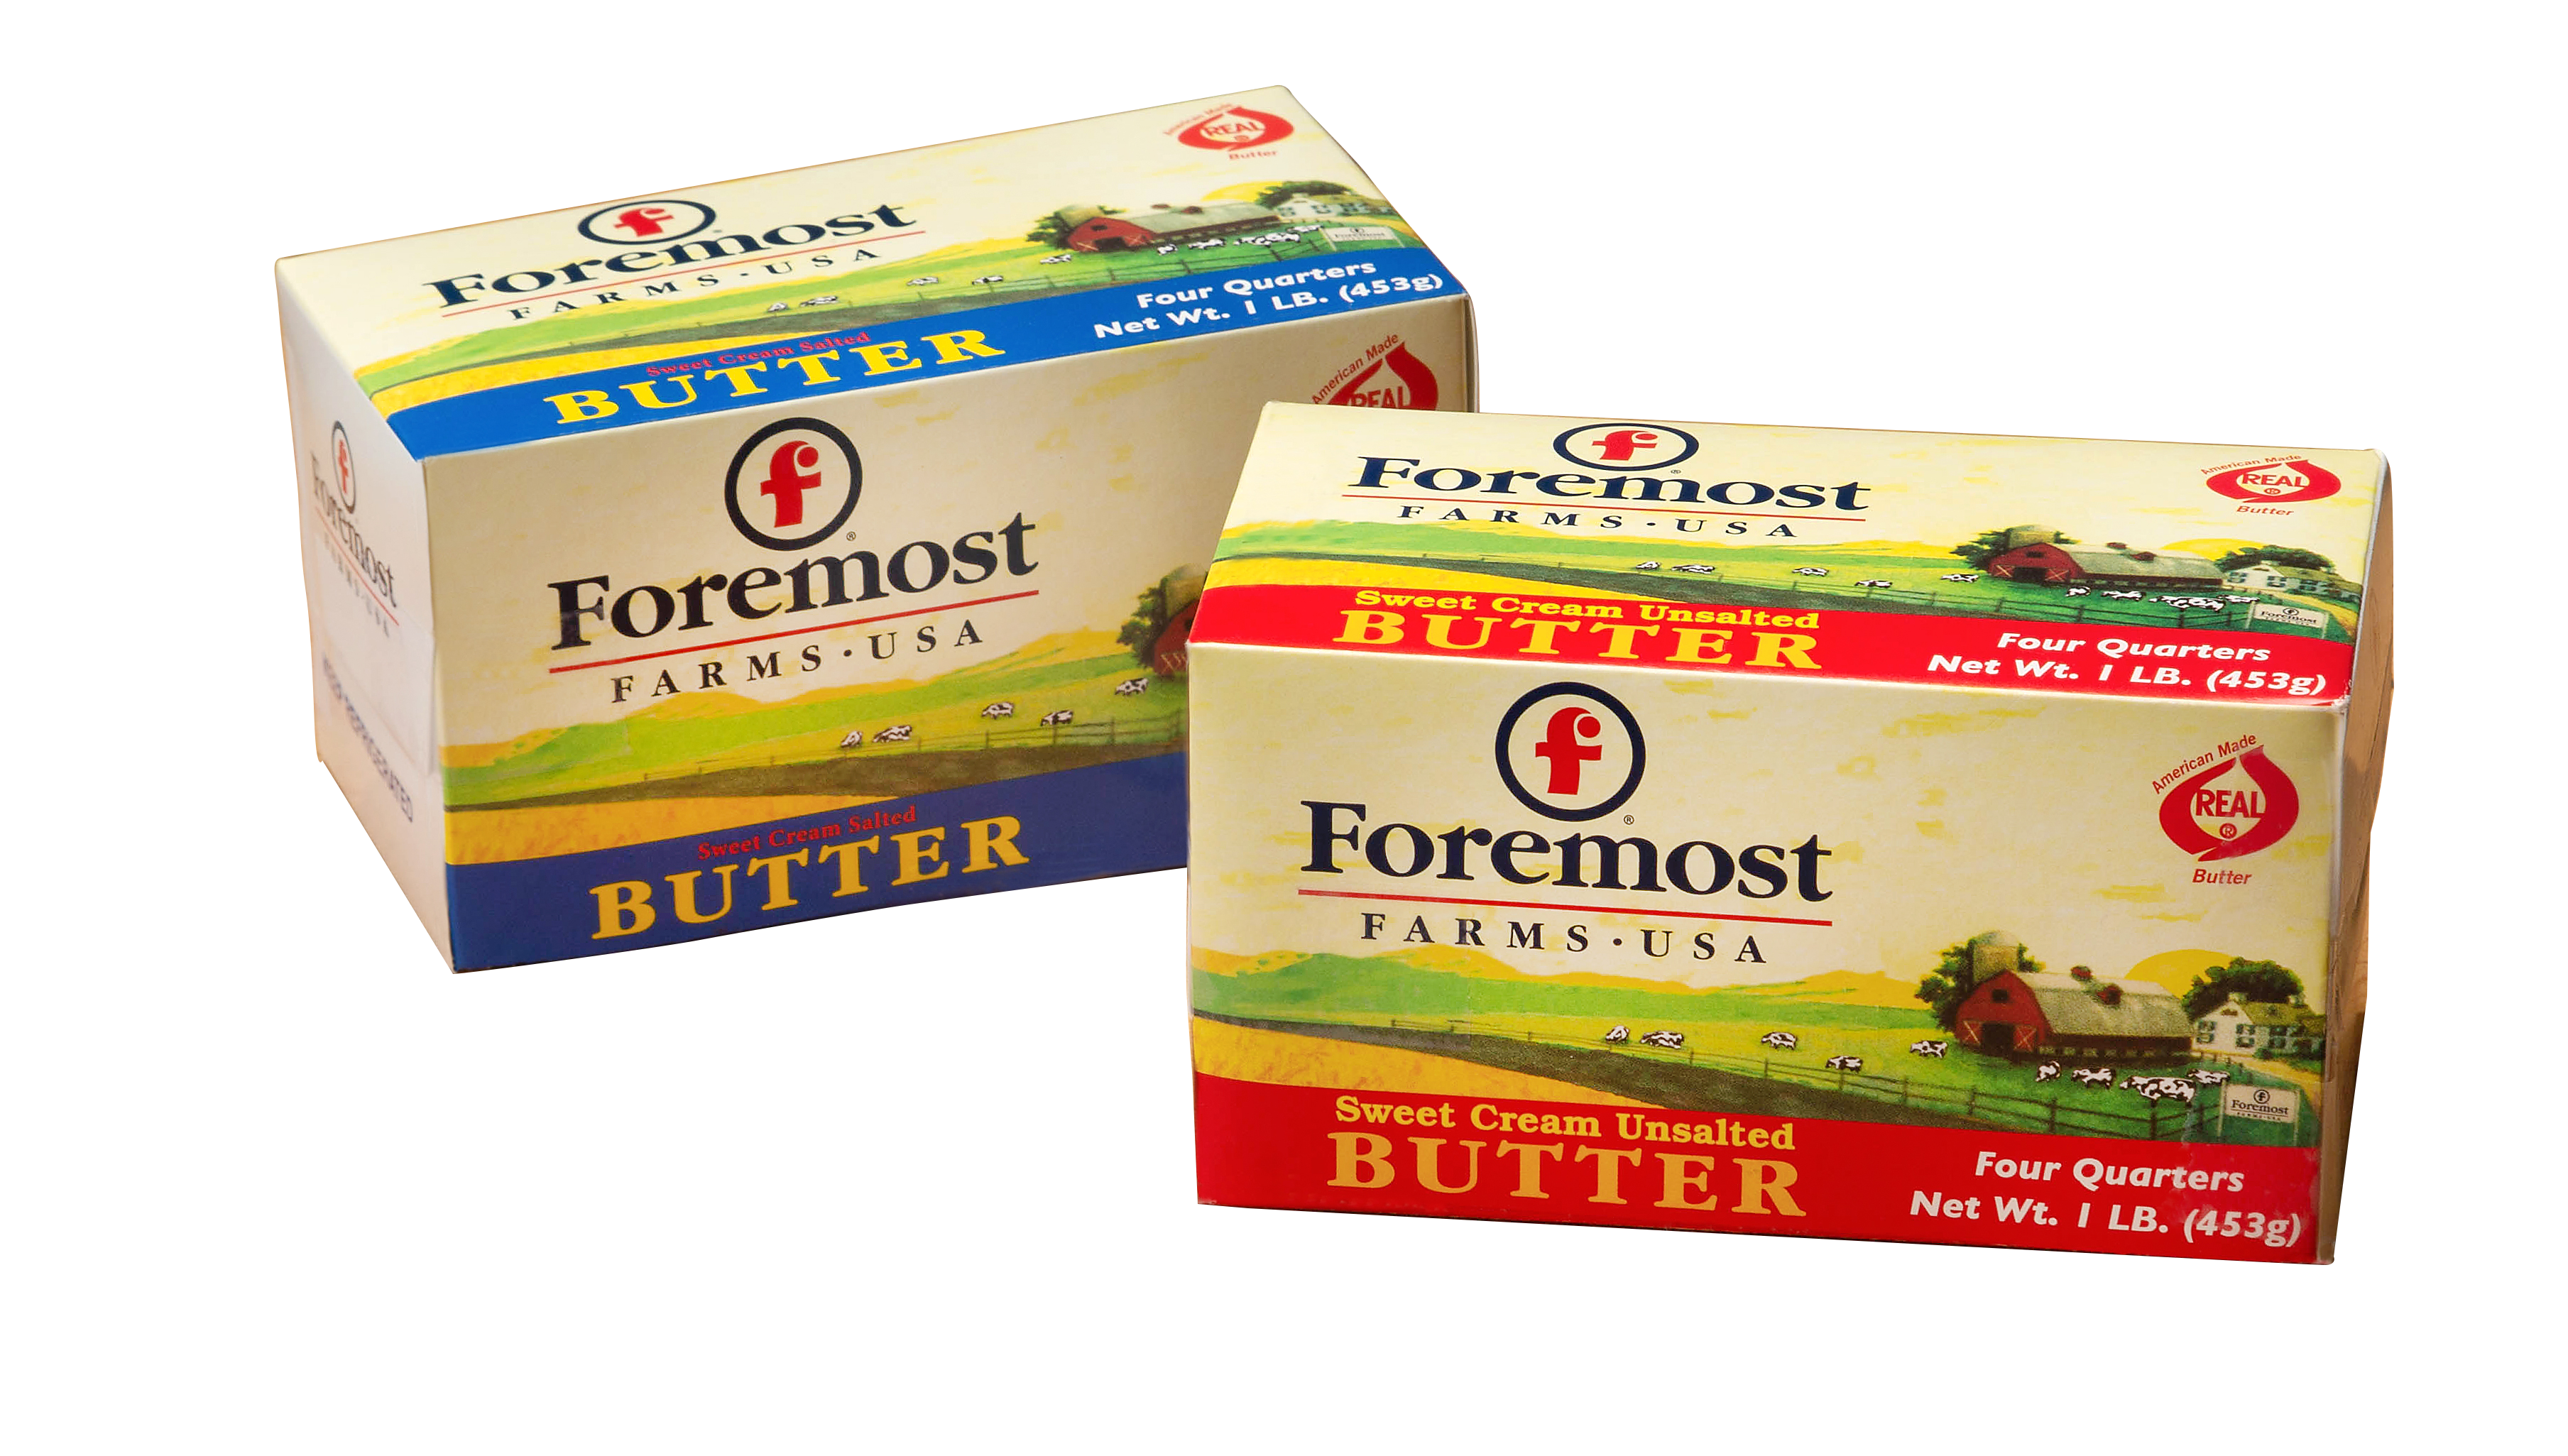 Foremost Farms butter